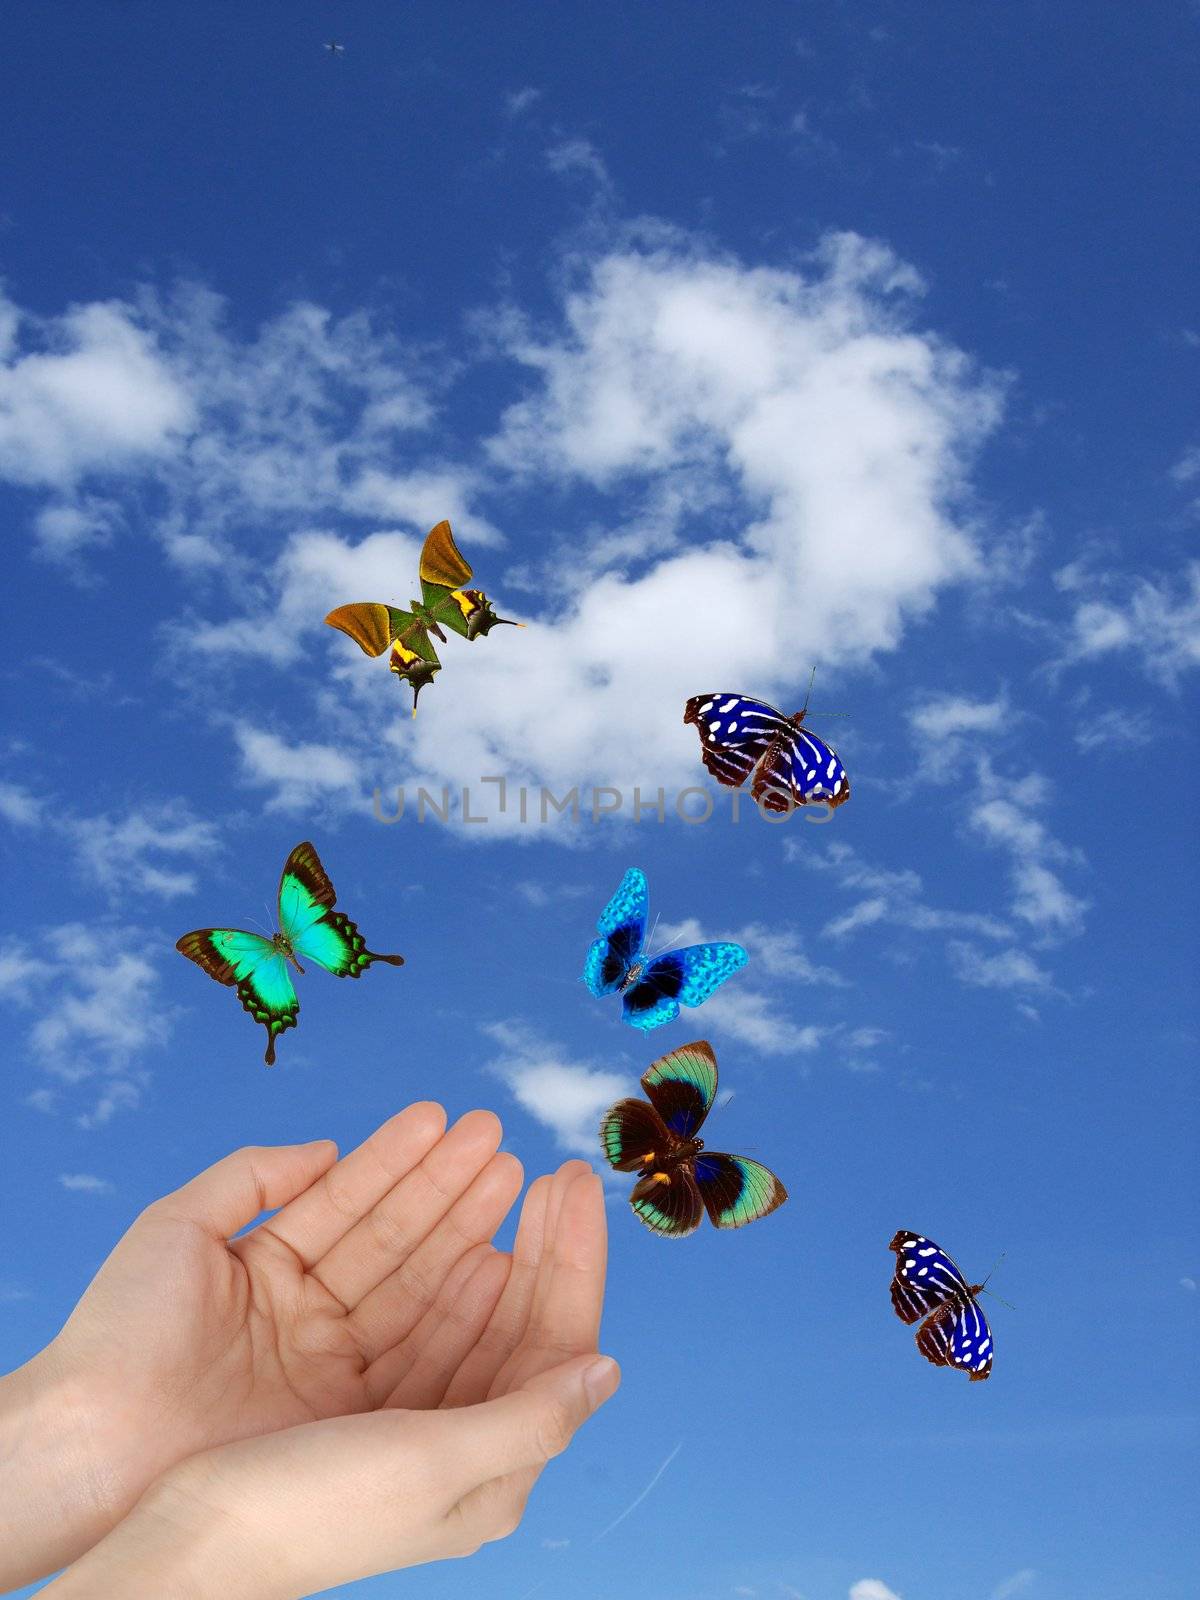 The butterflies flying in the sky